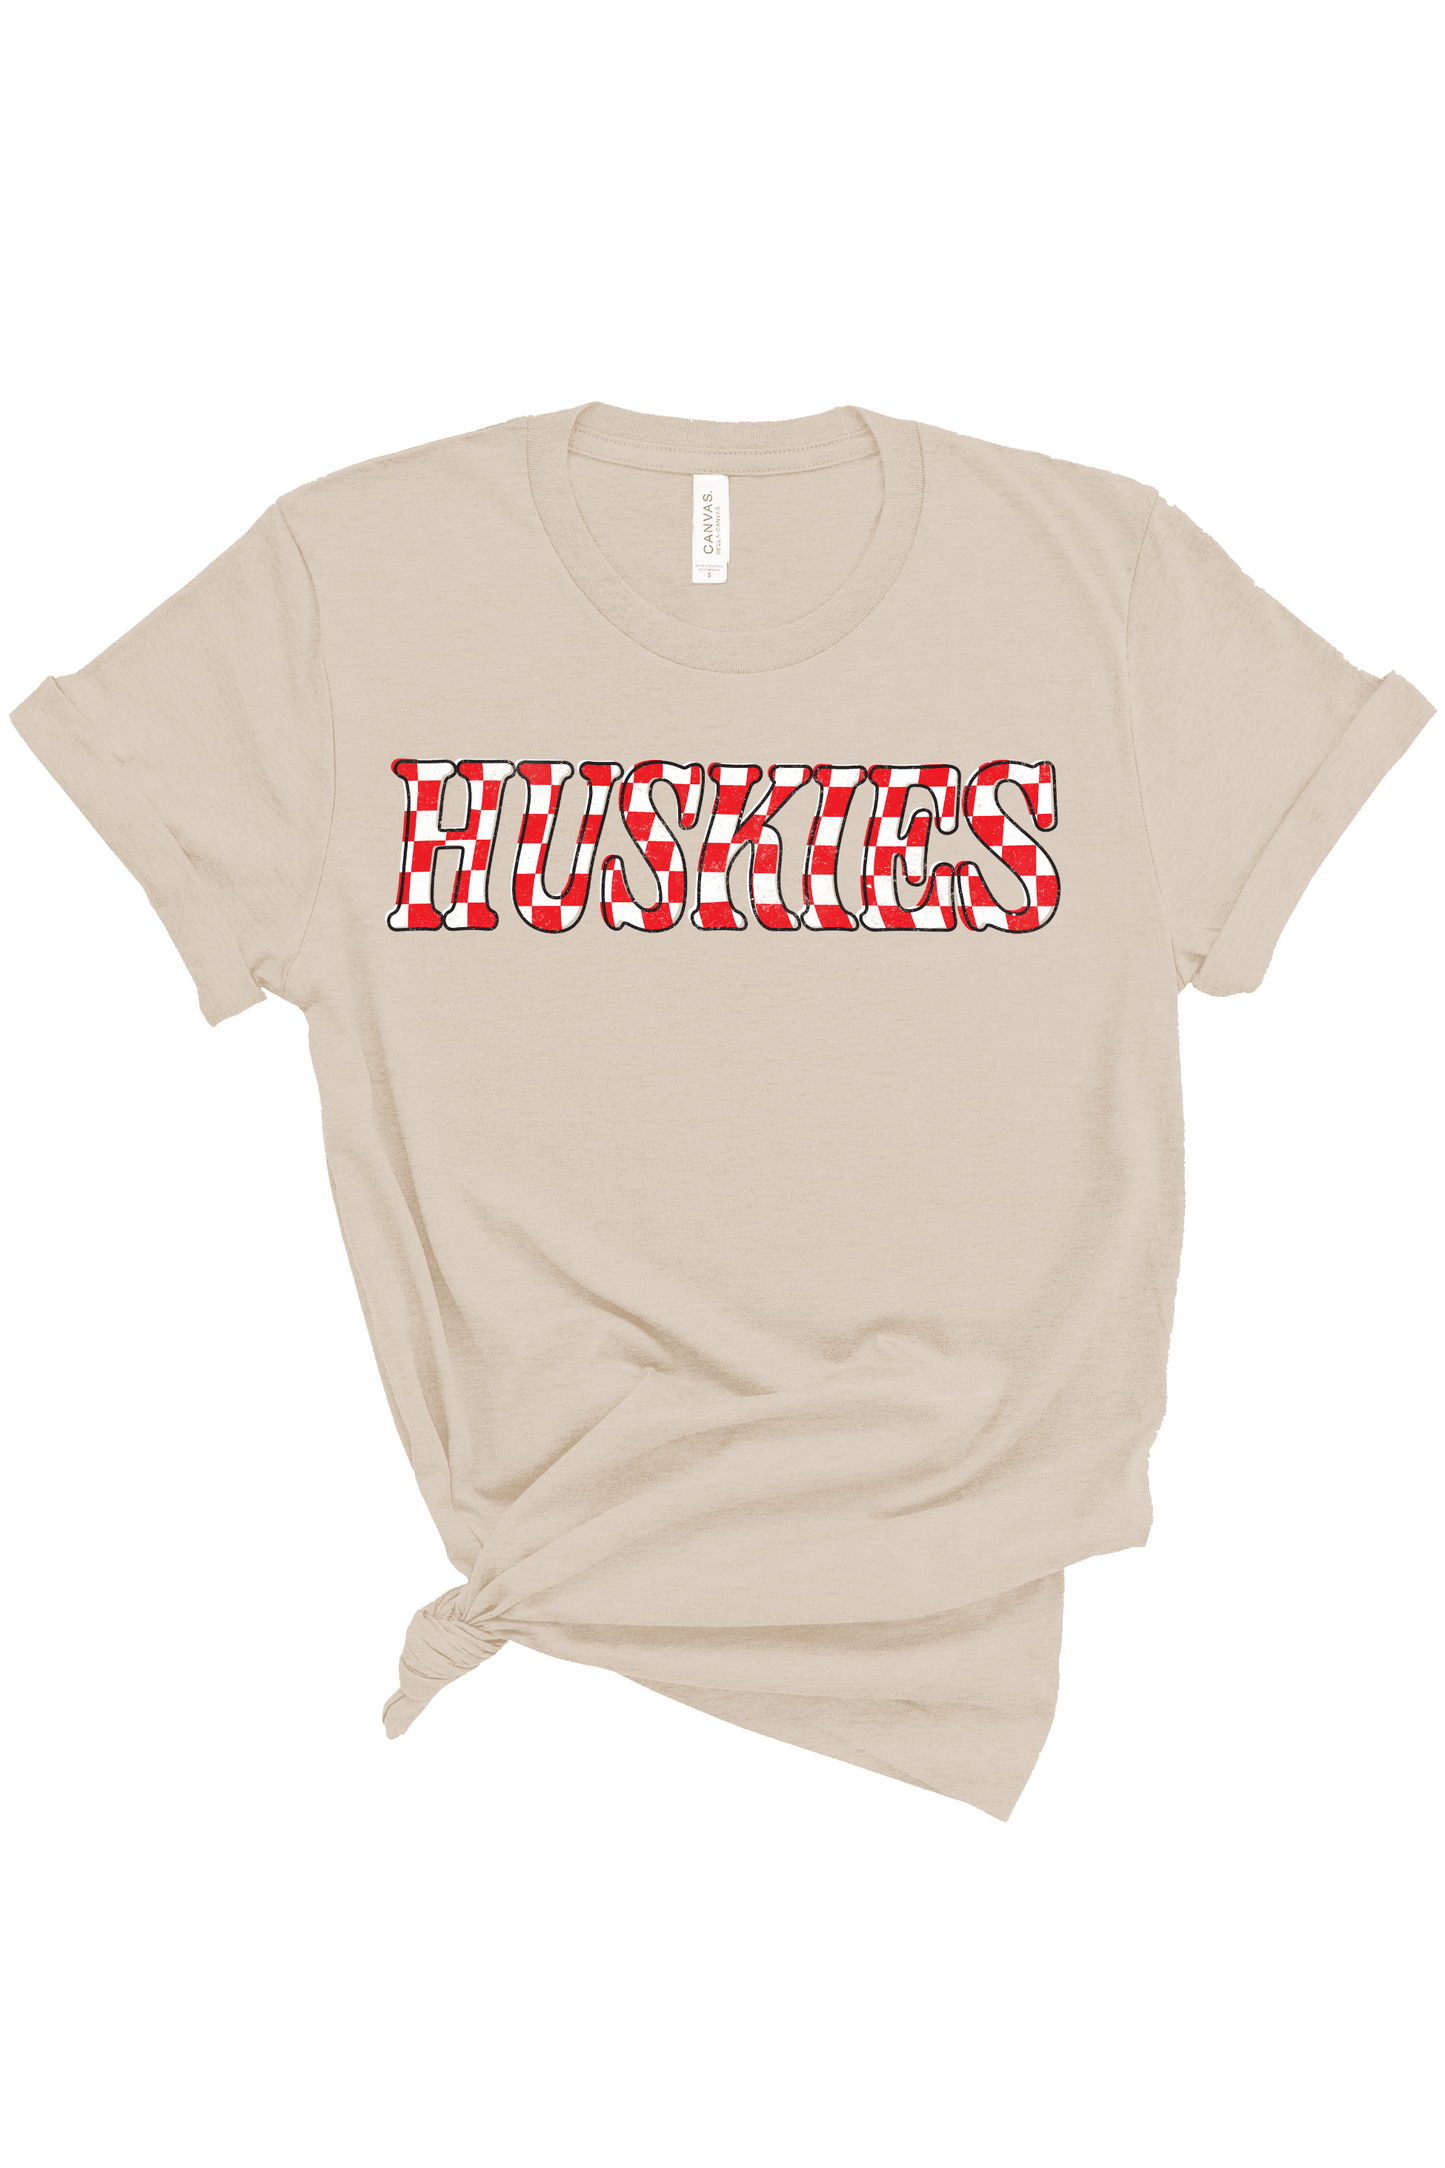 Customizable Checkered | Adult Tee-Adult Tee-Sister Shirts-Sister Shirts, Cute & Custom Tees for Mama & Littles in Trussville, Alabama.